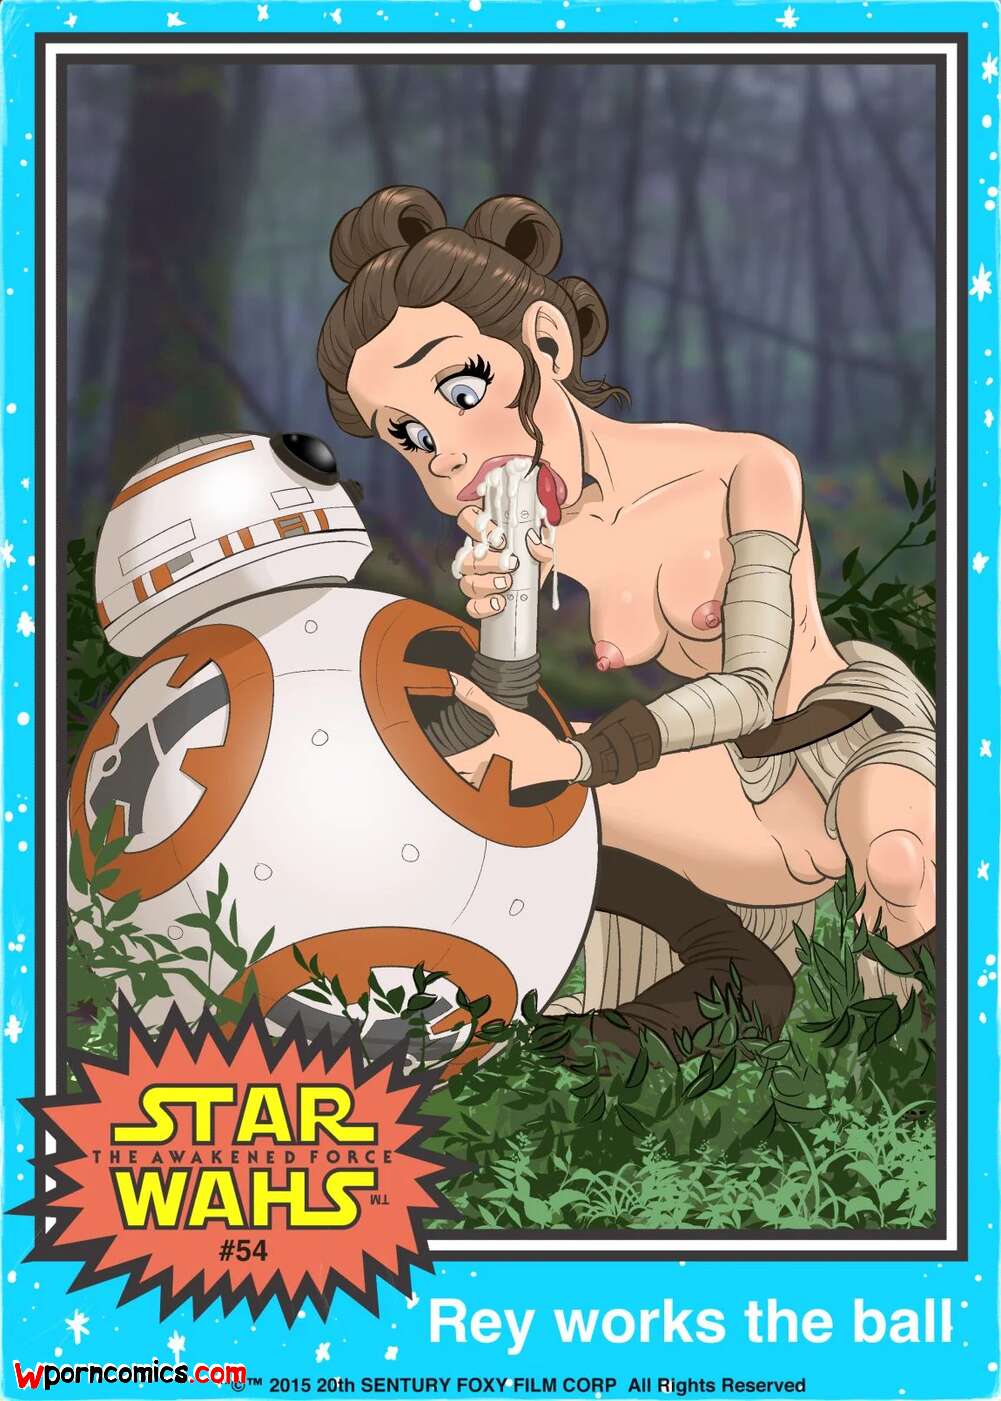 Star Wars Whore Porn - ðŸ˜ˆ Porn comic Star Whore Force Cards. Star Wars. Sinope. Erotic comic much,  so she ðŸ˜ˆ | Porn comics hentai adult only | hqporncomics.com